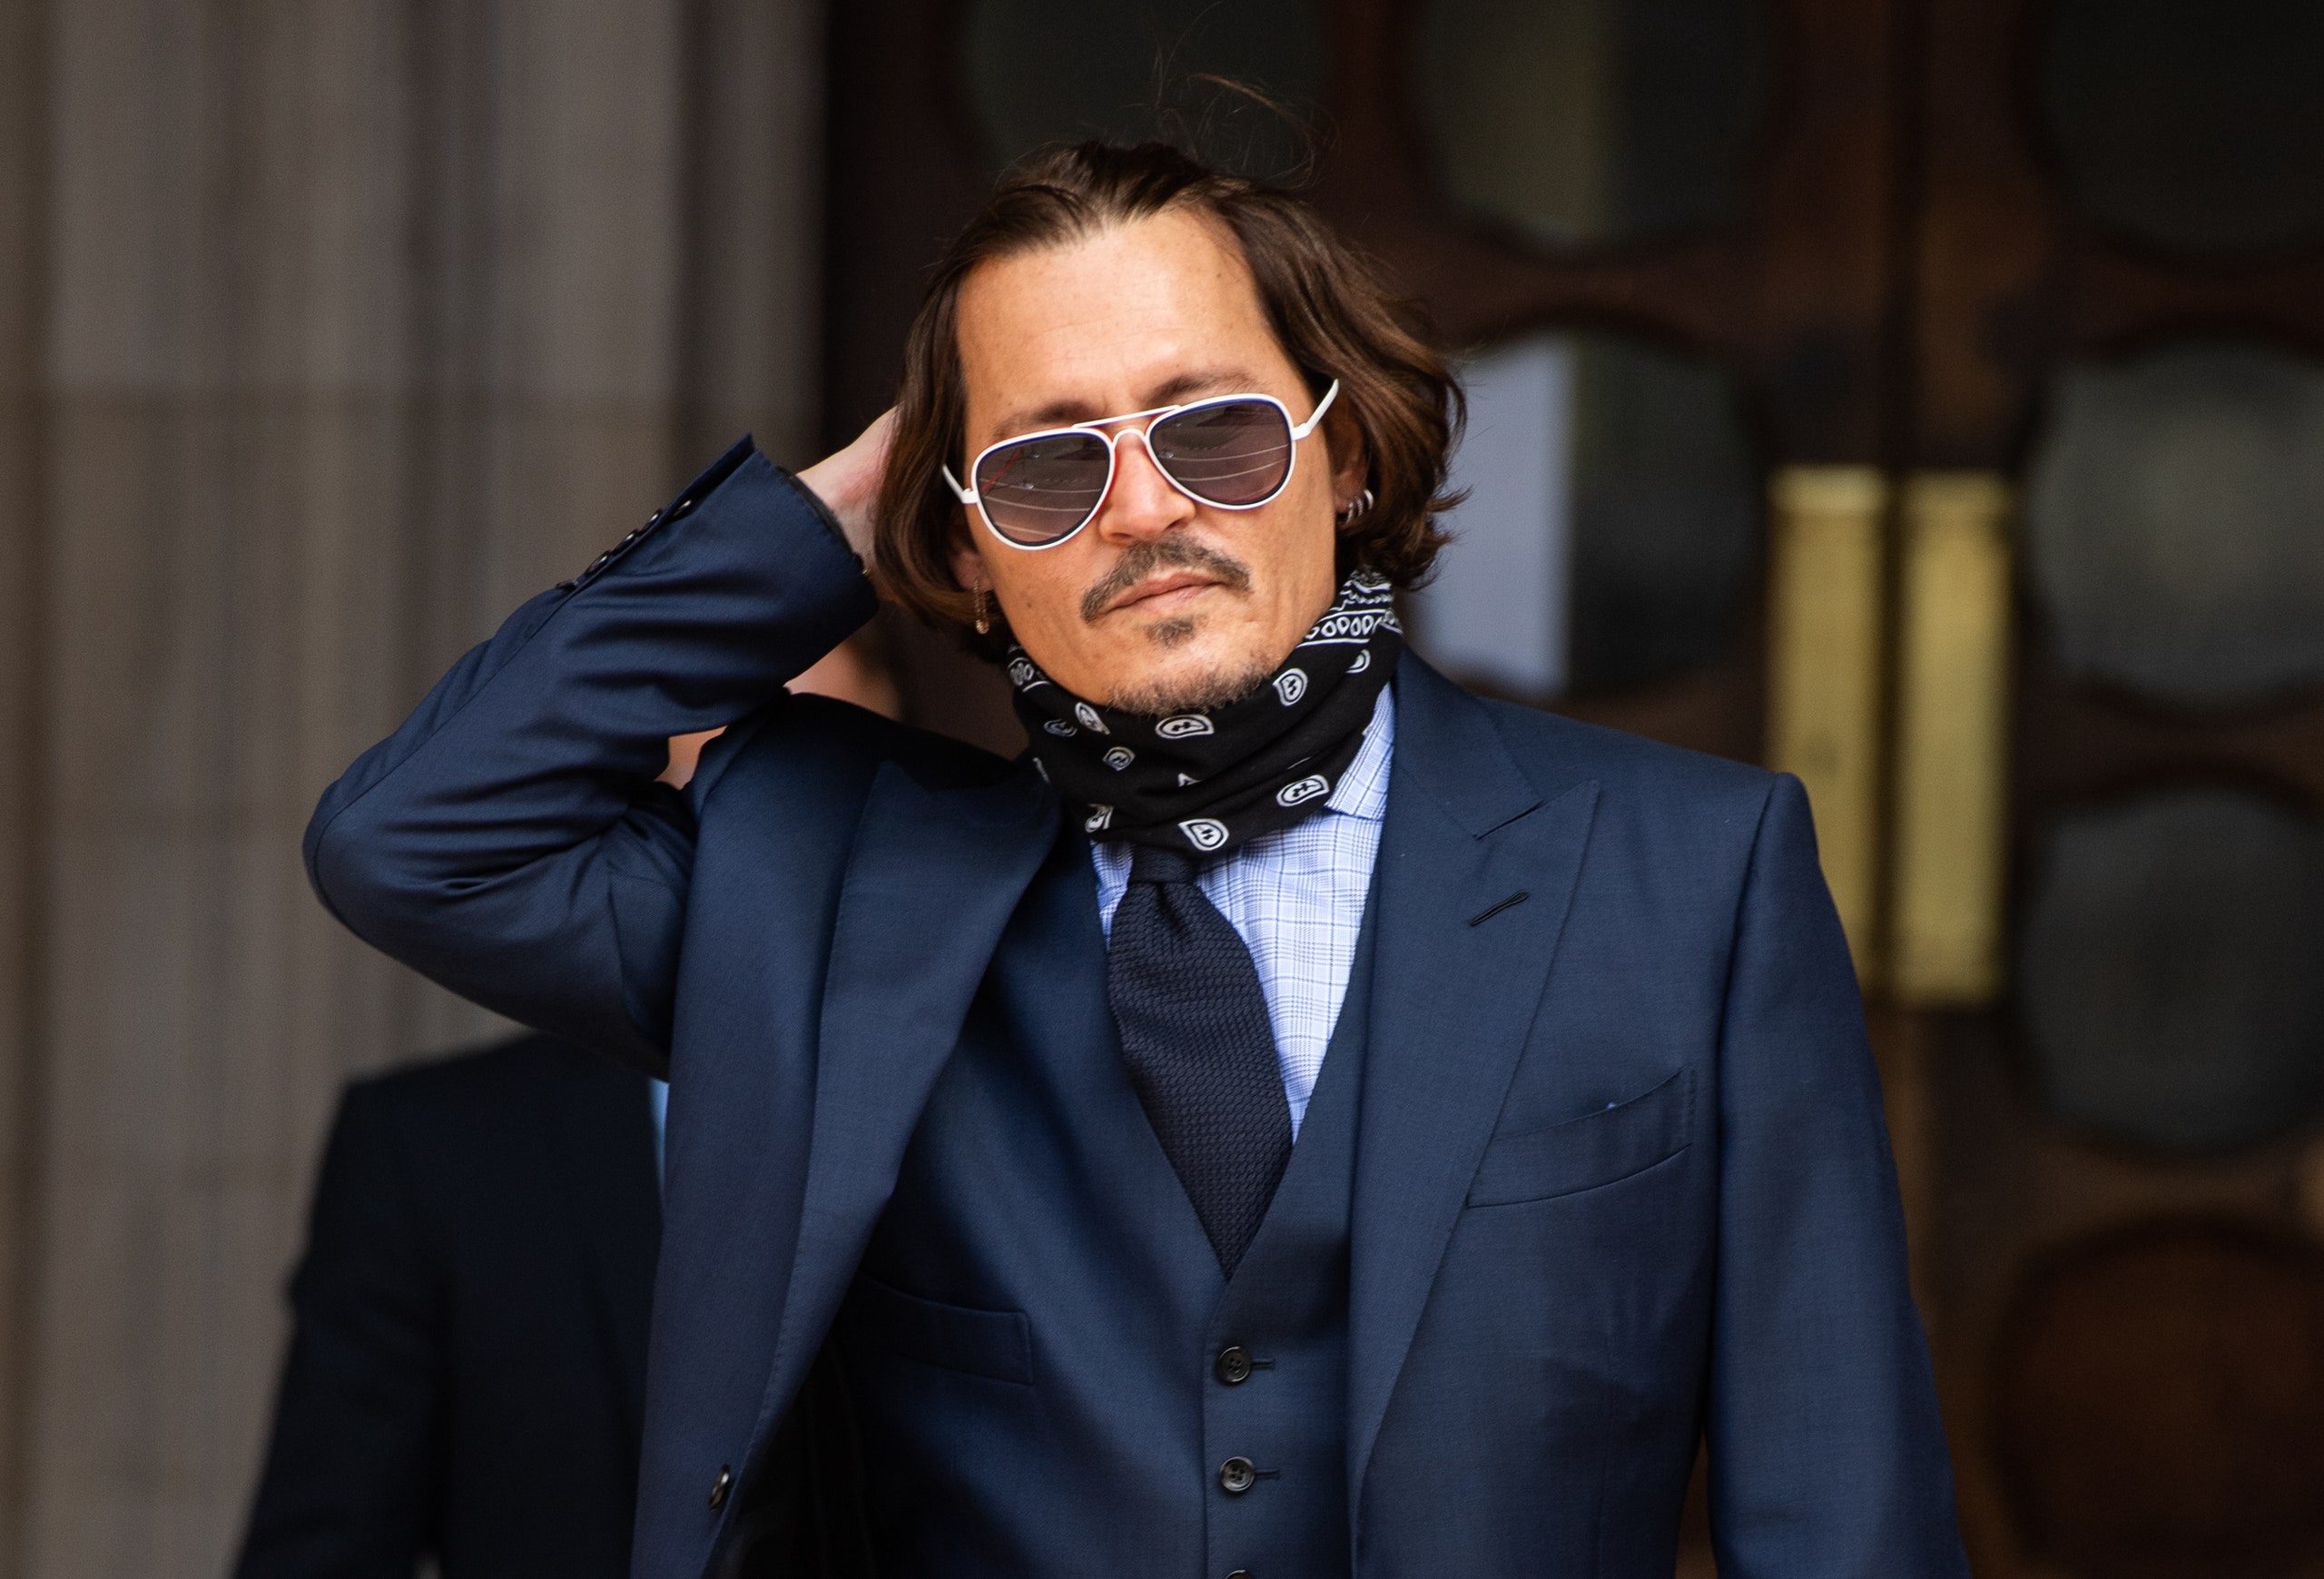 Johnny Depp #39 s bodyguard admits giving wrong photo to court